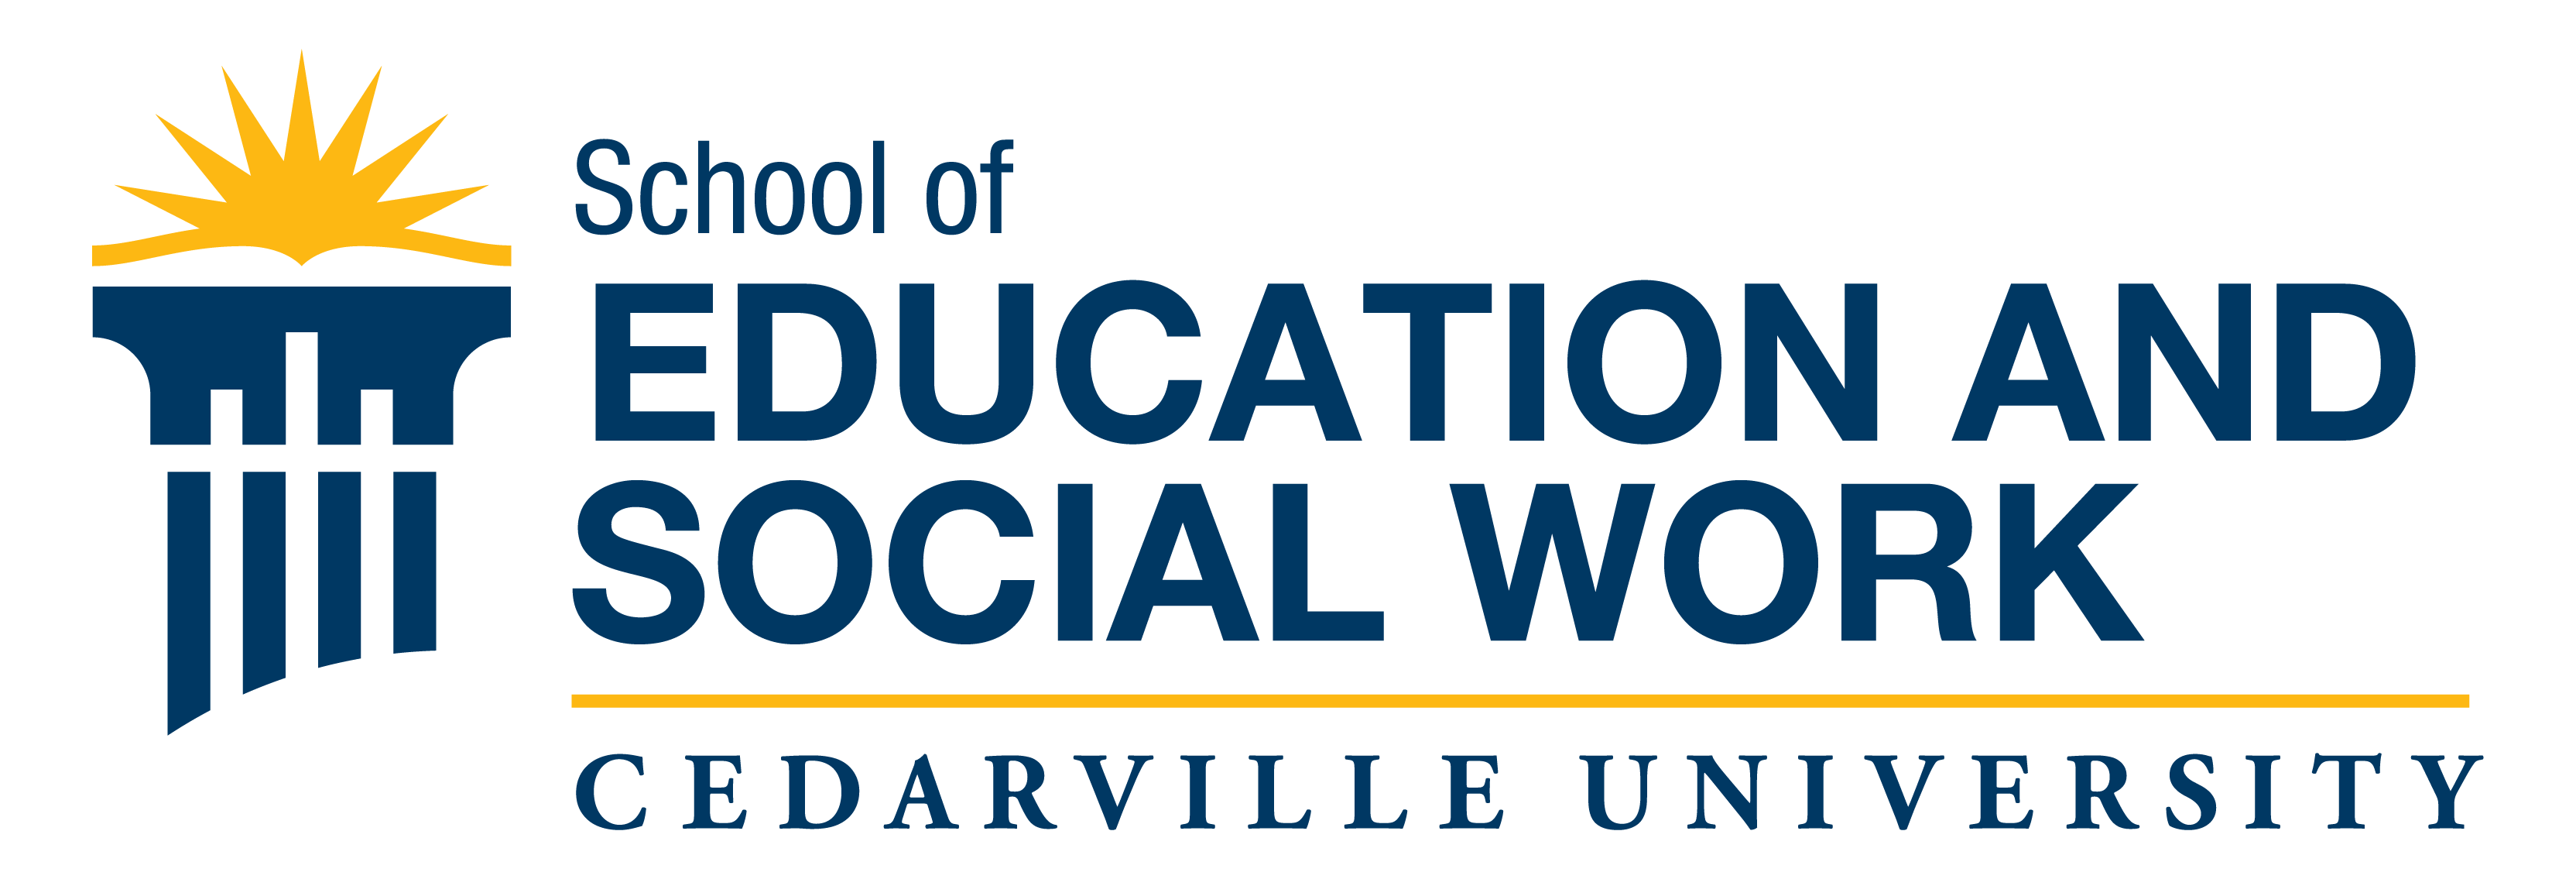 School of Education and Social Work